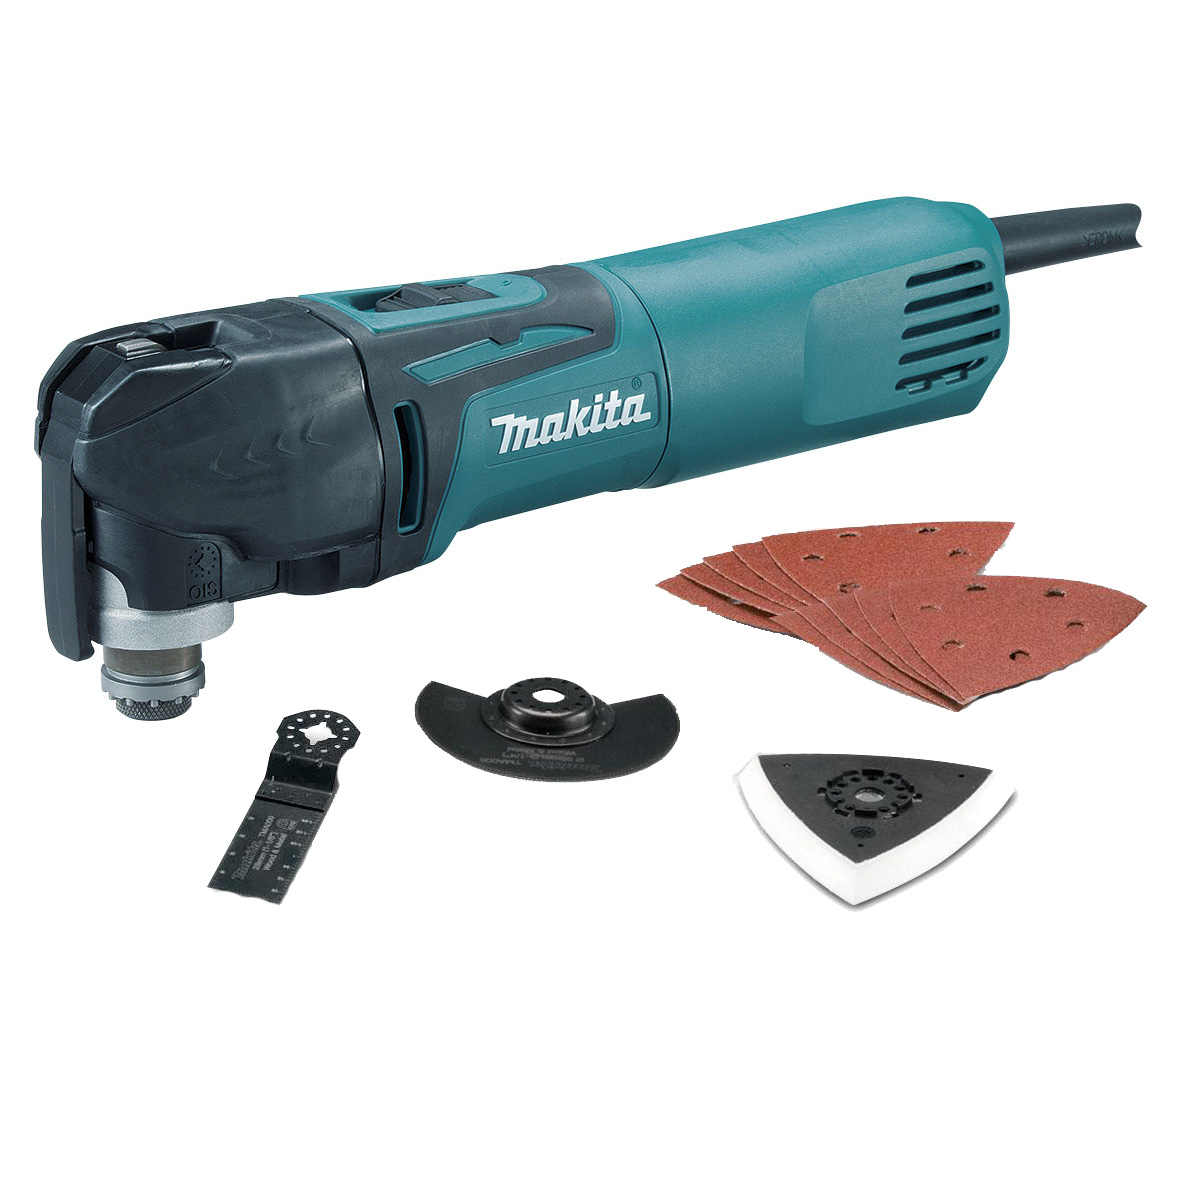 Makita 320W Lever Style Multi Tool with Accessories TM3010CX4